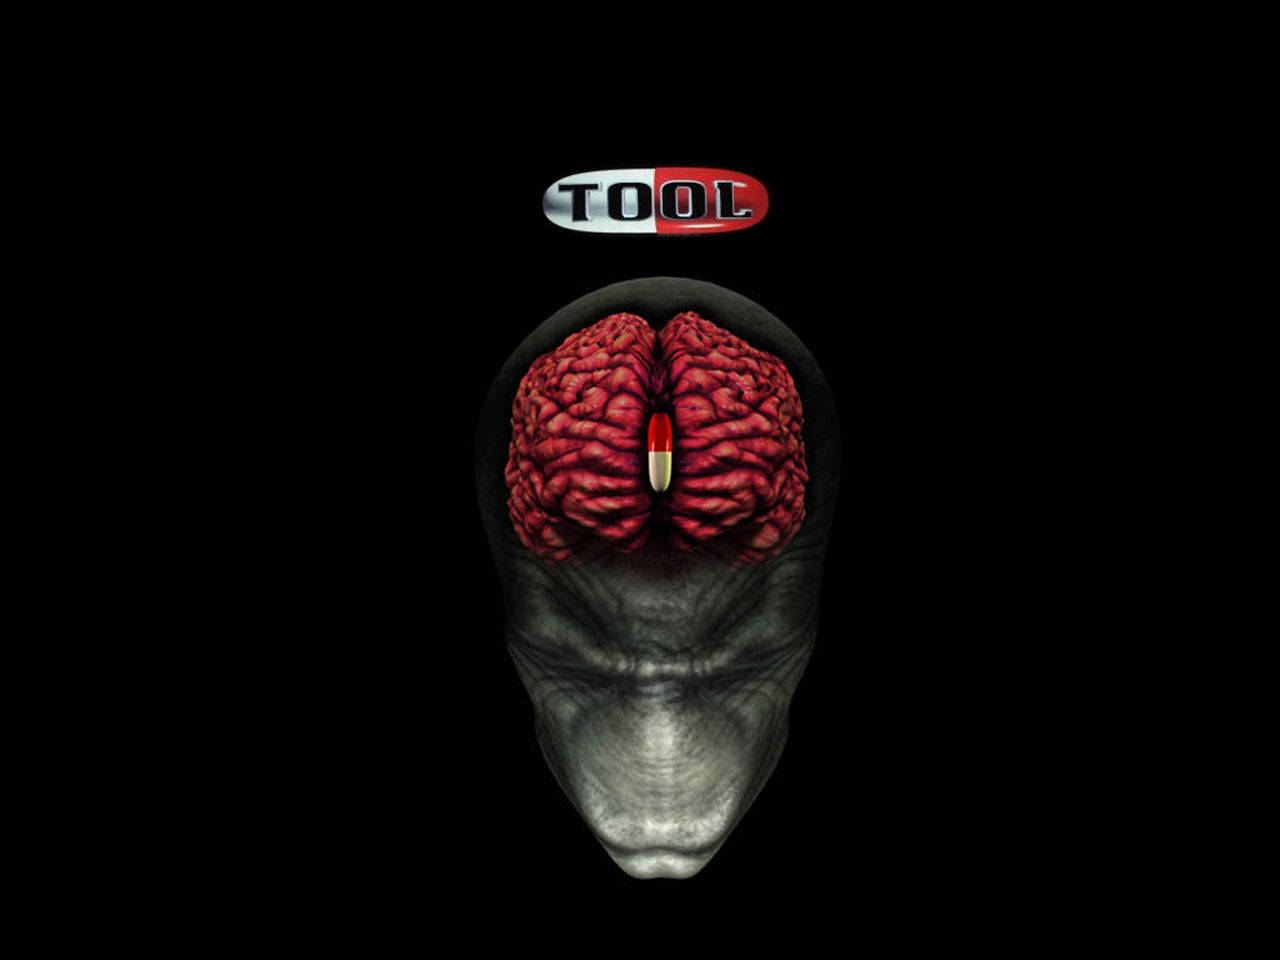 "Expand Your Mind with Tool's Music" Wallpaper